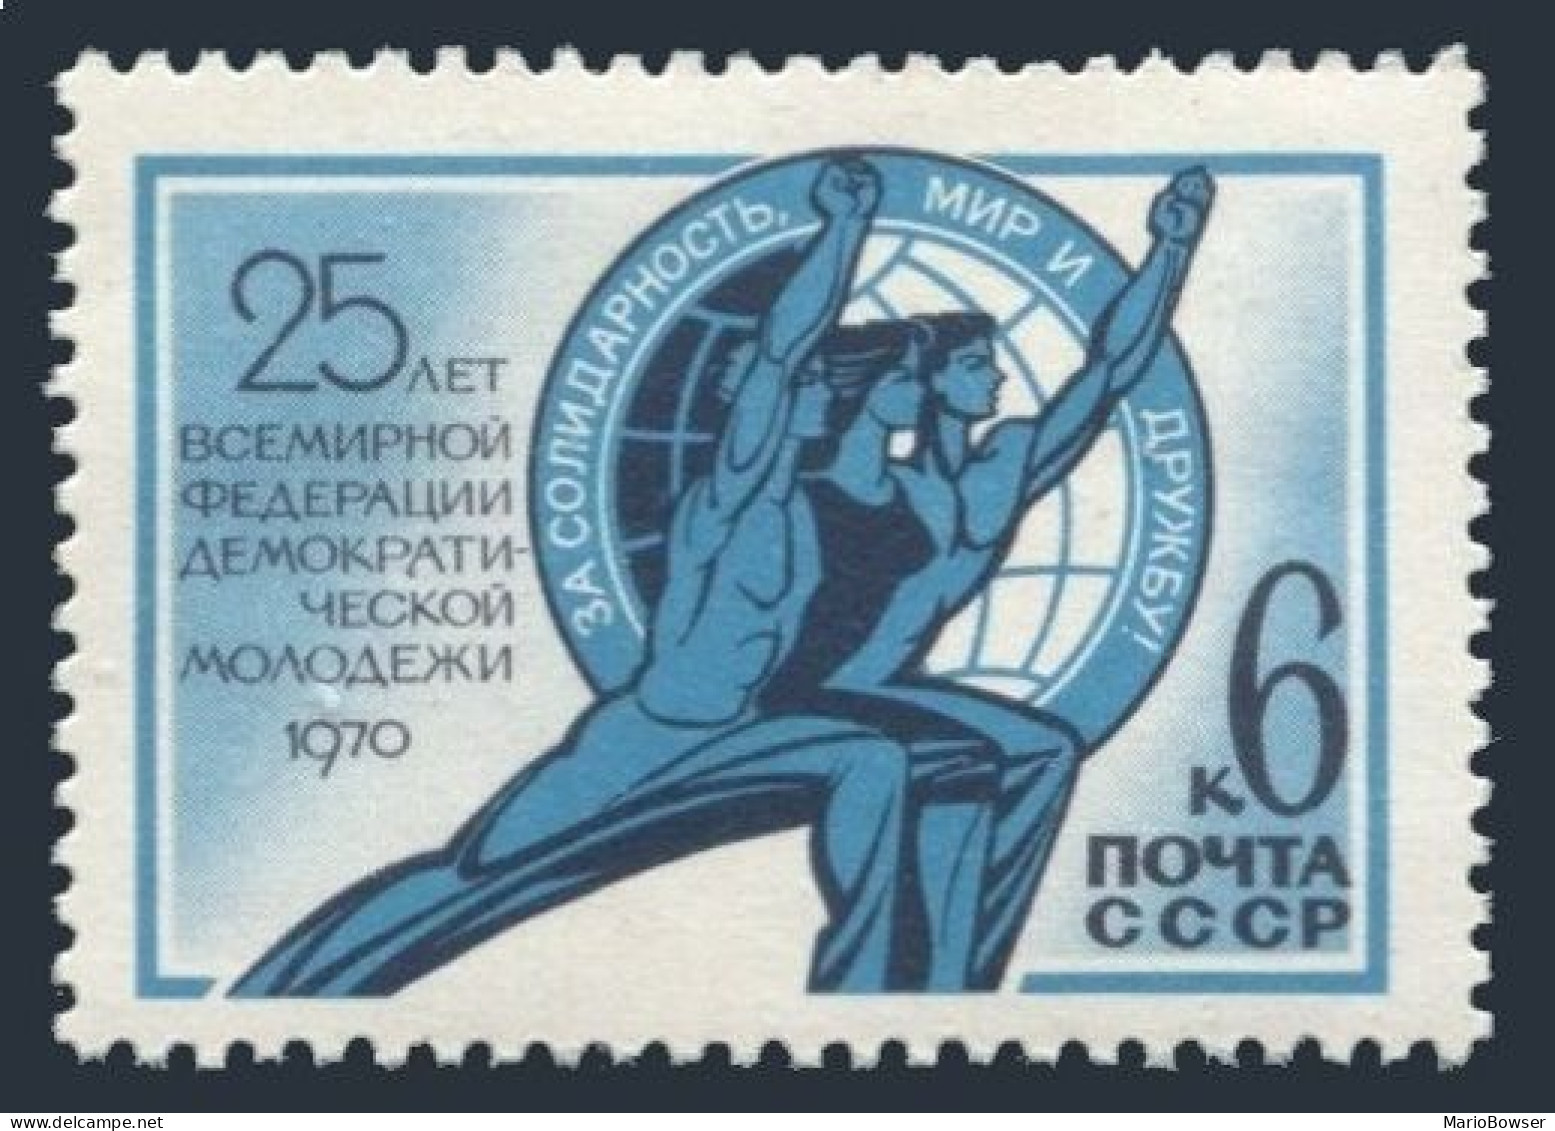 Russia 3739 Block/4,MNH.Mi 3768. World Federation Of Democratic Youth,1970. - Unused Stamps